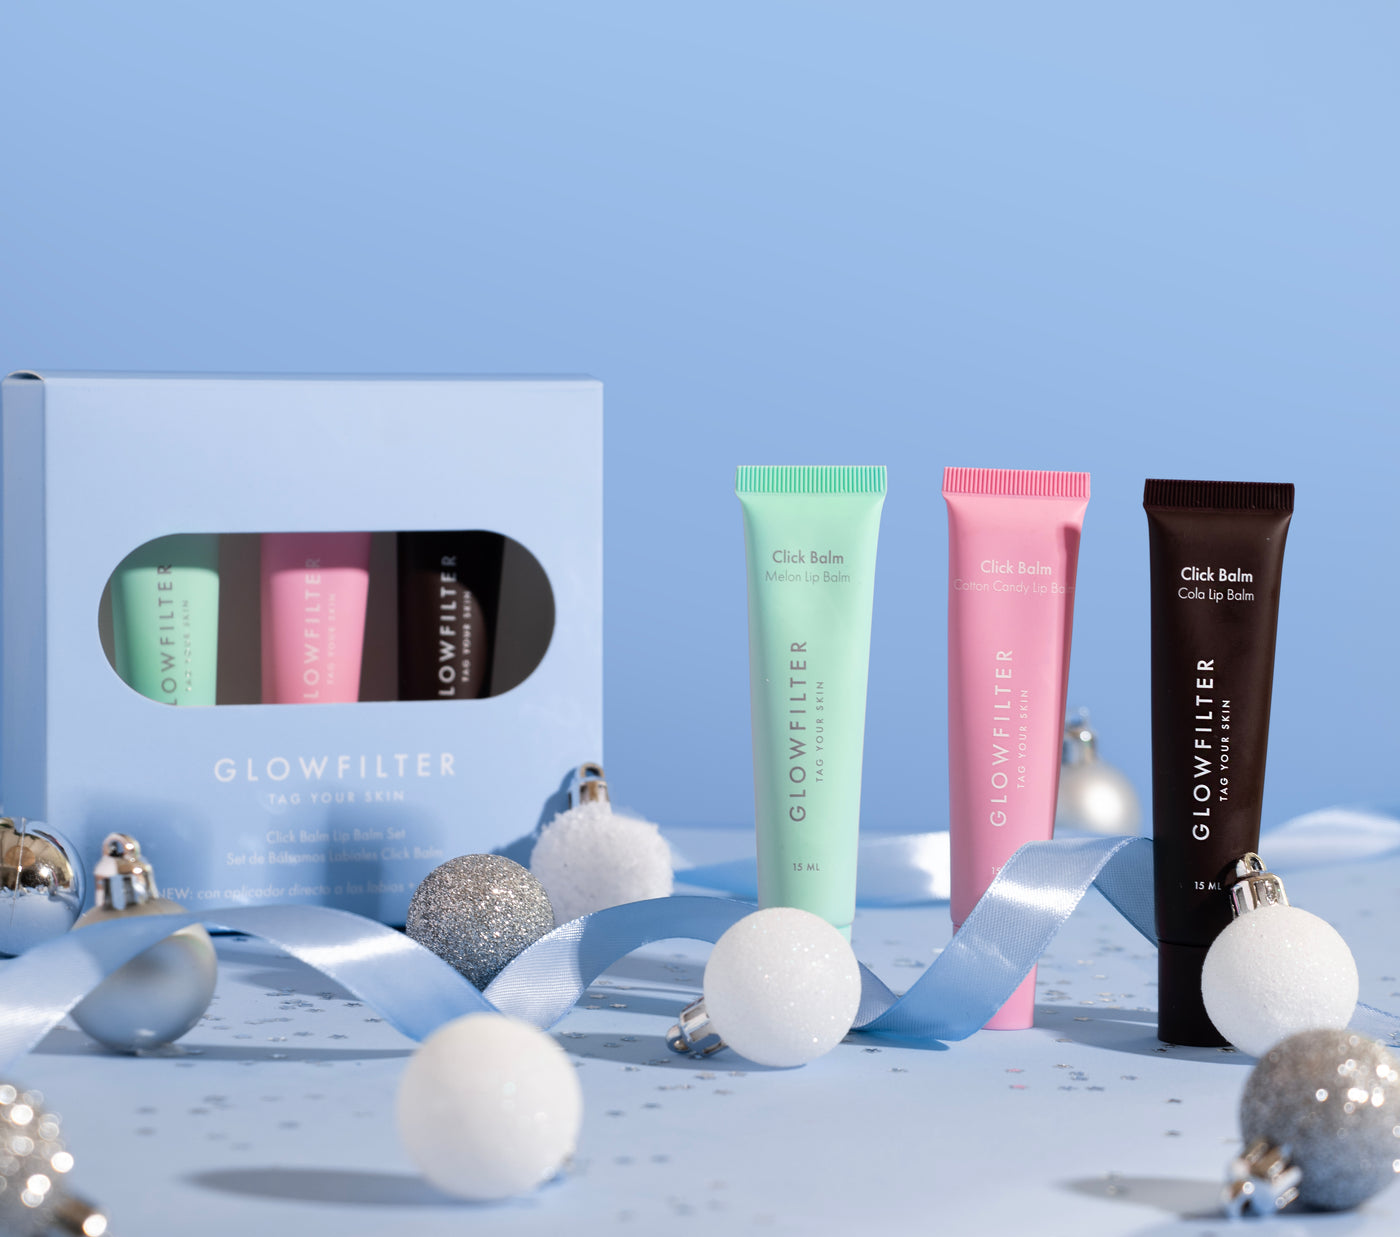 NEW CLICK BALM LIMITED EDITION SET